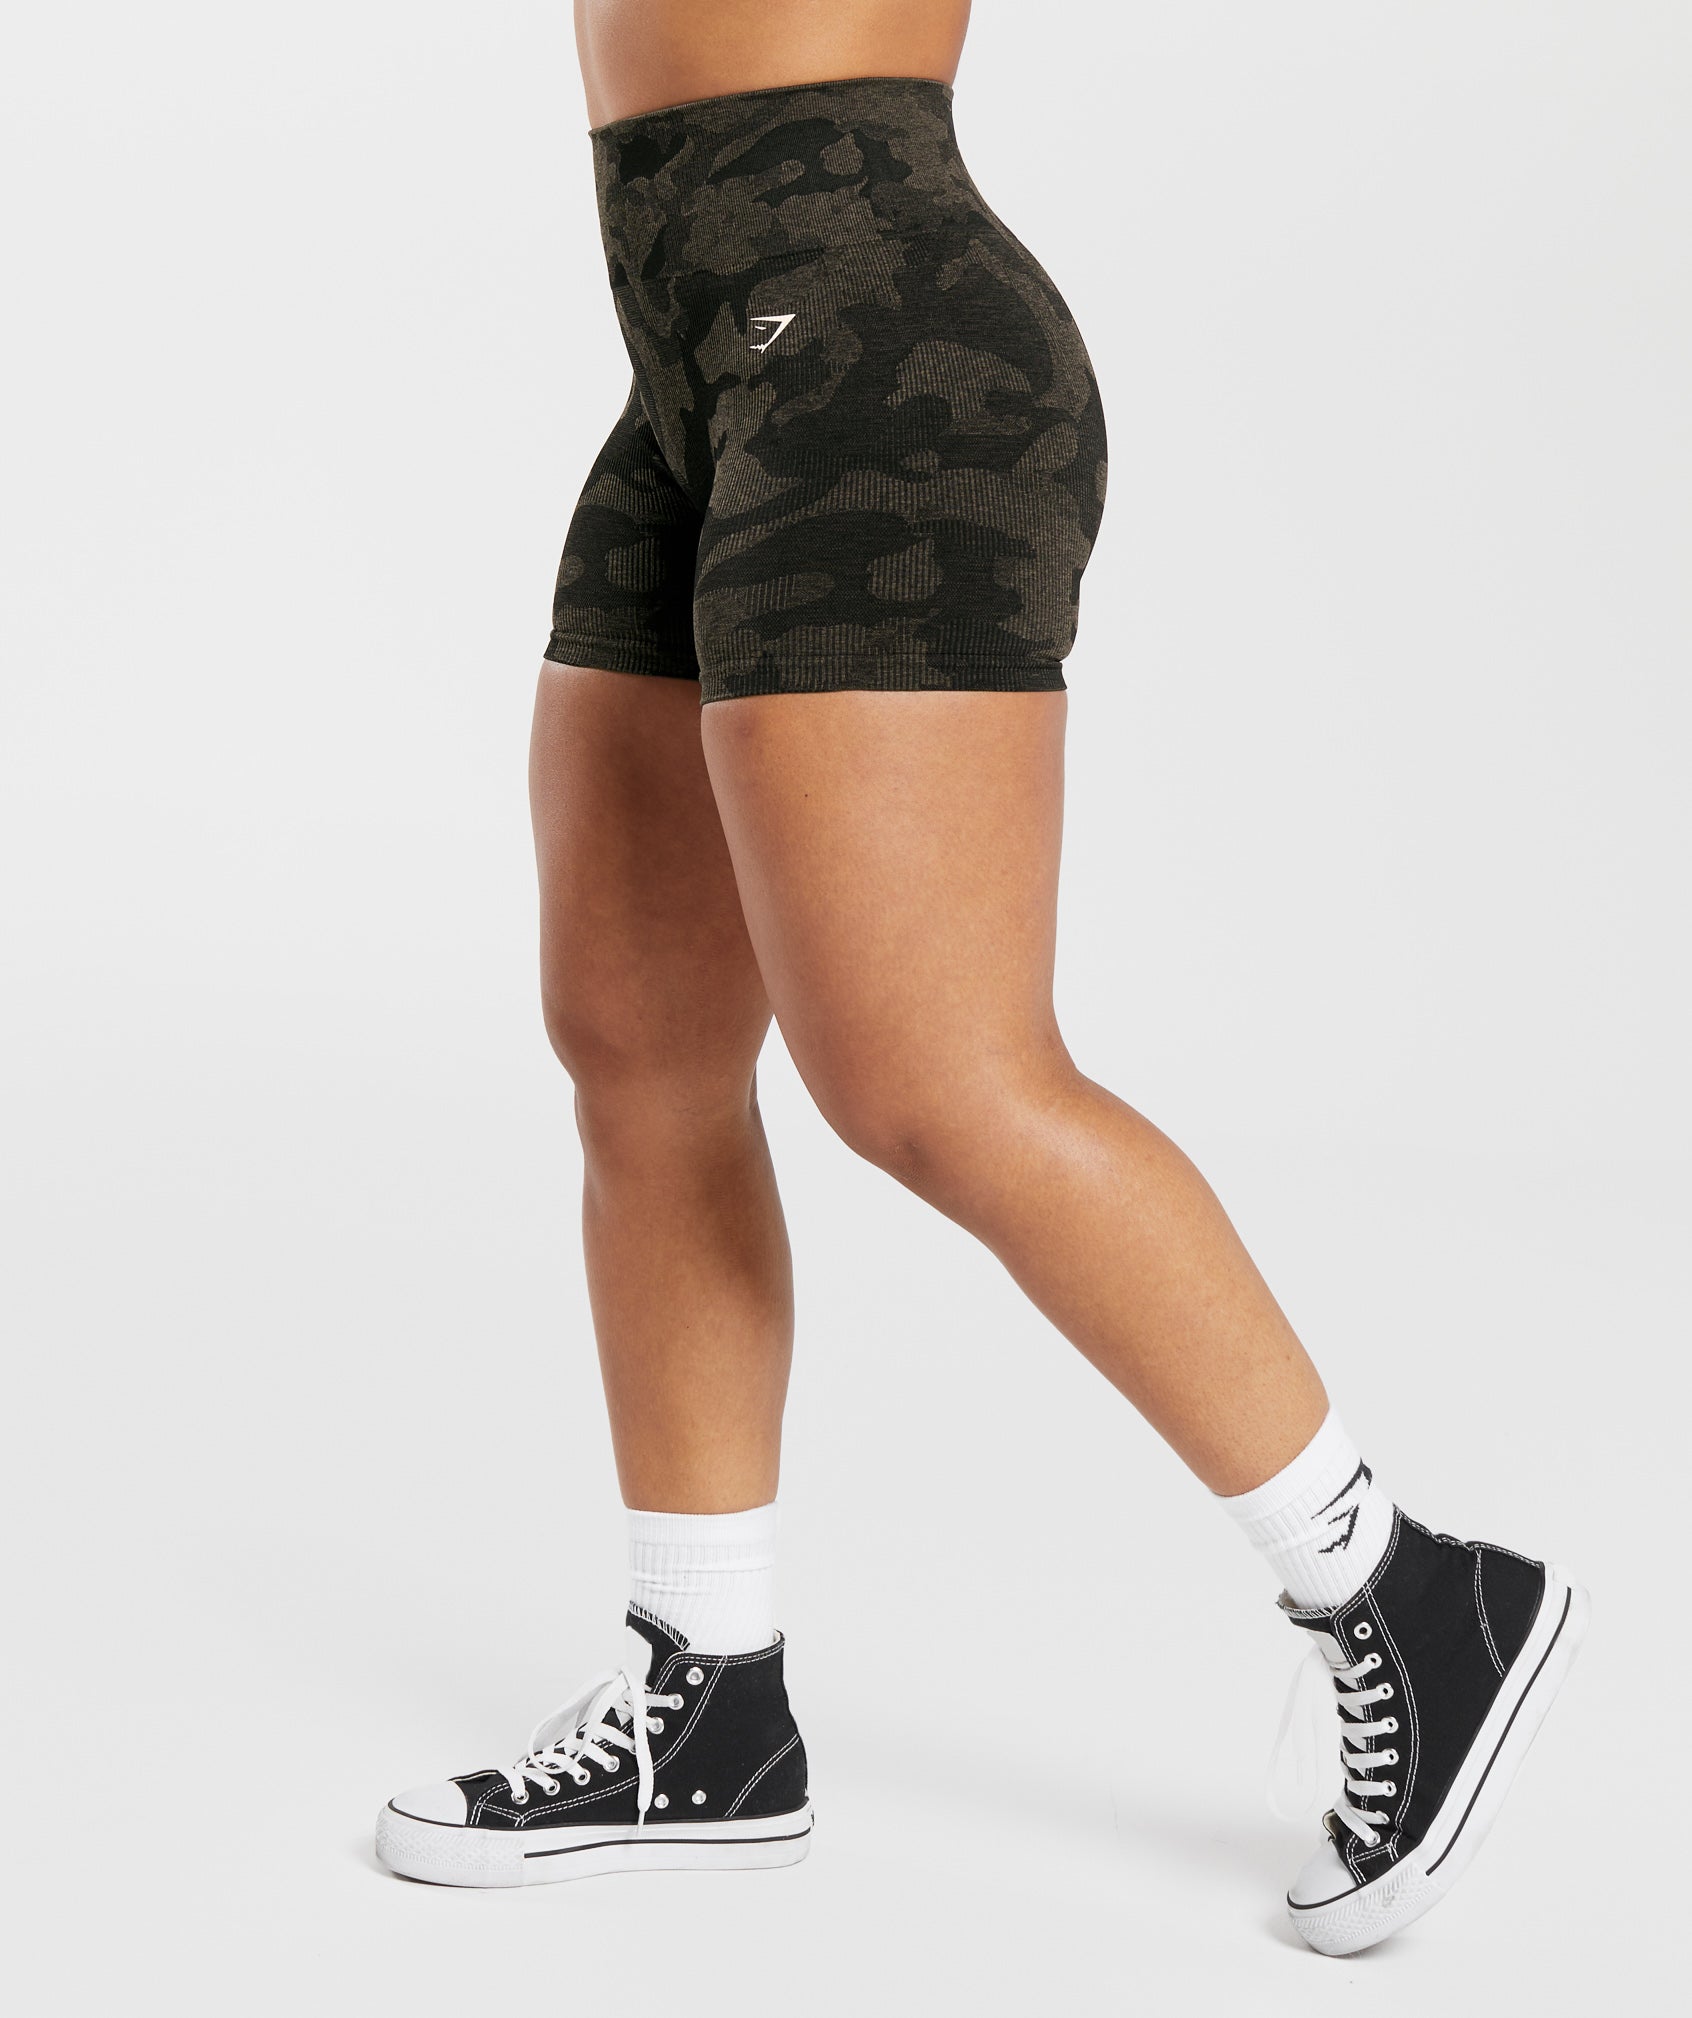 Adapt Camo Seamless Ribbed Shorts in Black/Camo Brown - view 3